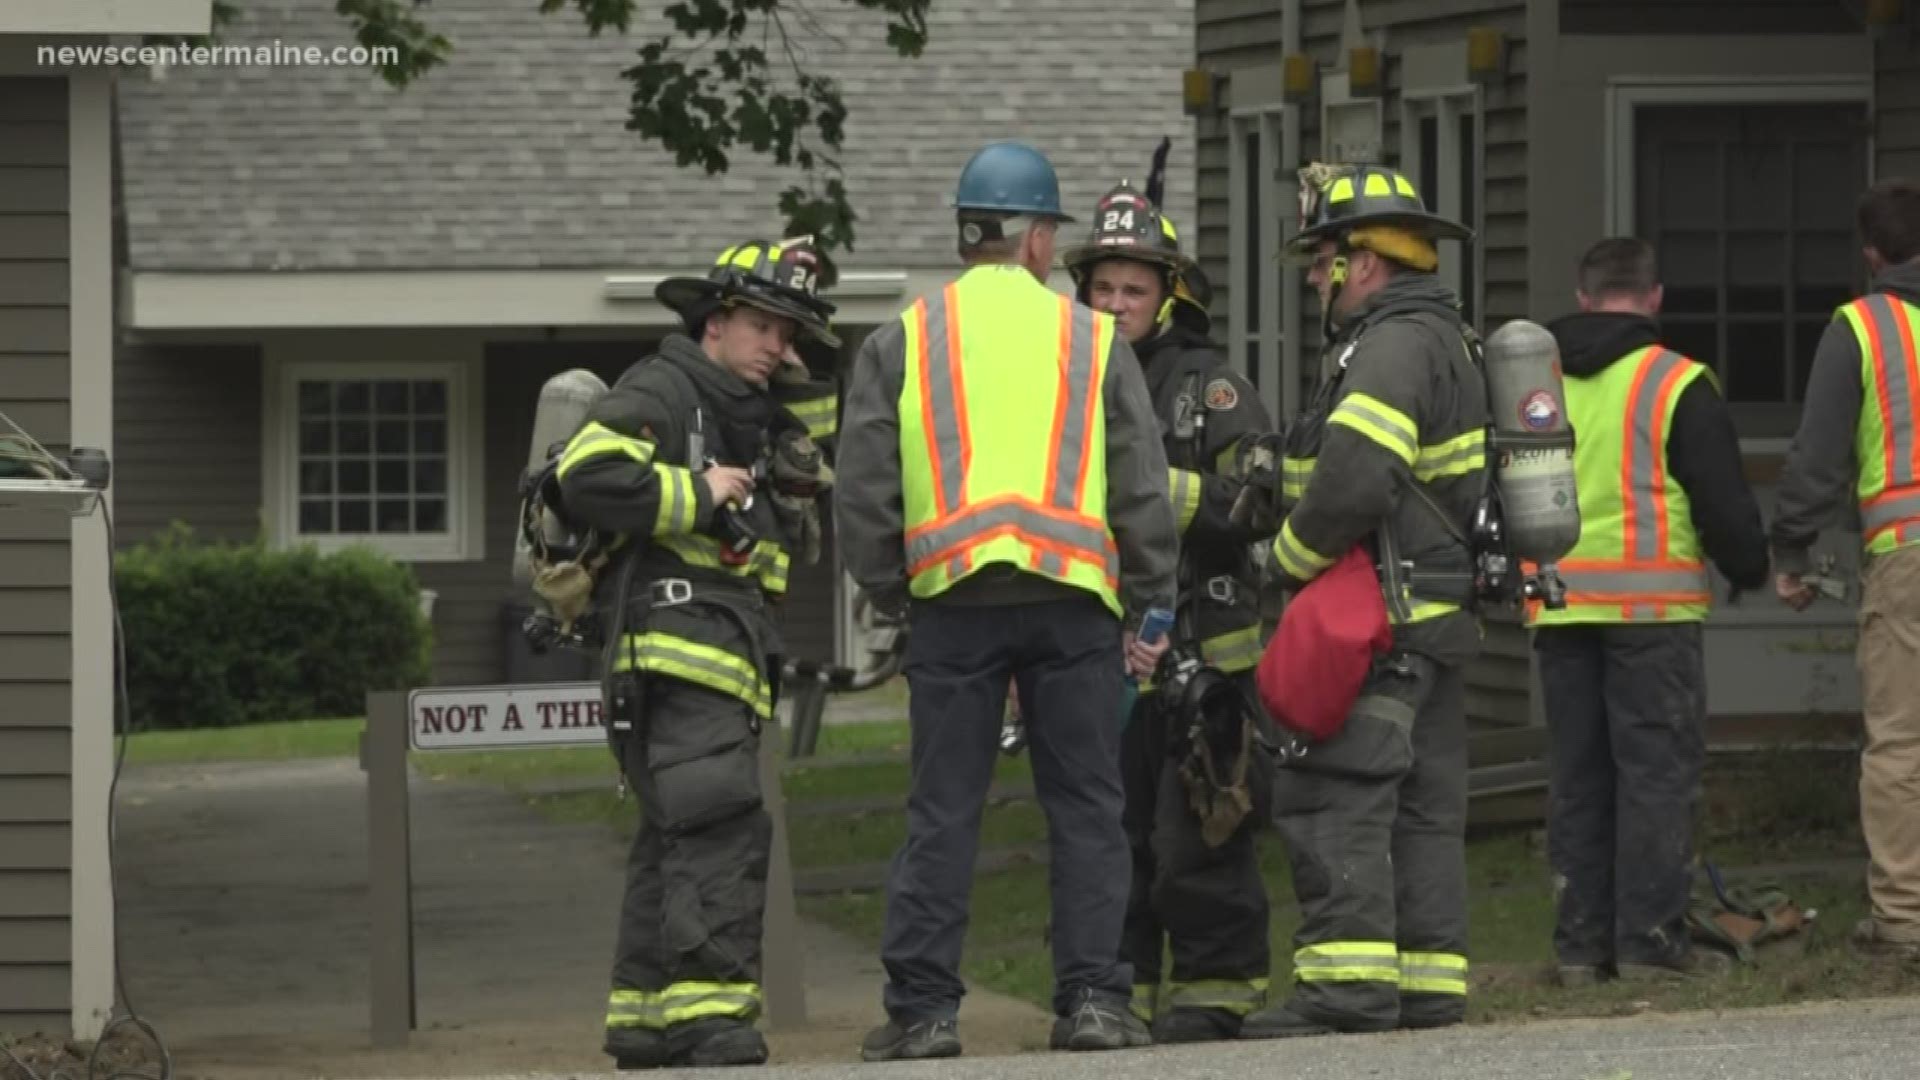 Gas leak reports have increased, firefighters say